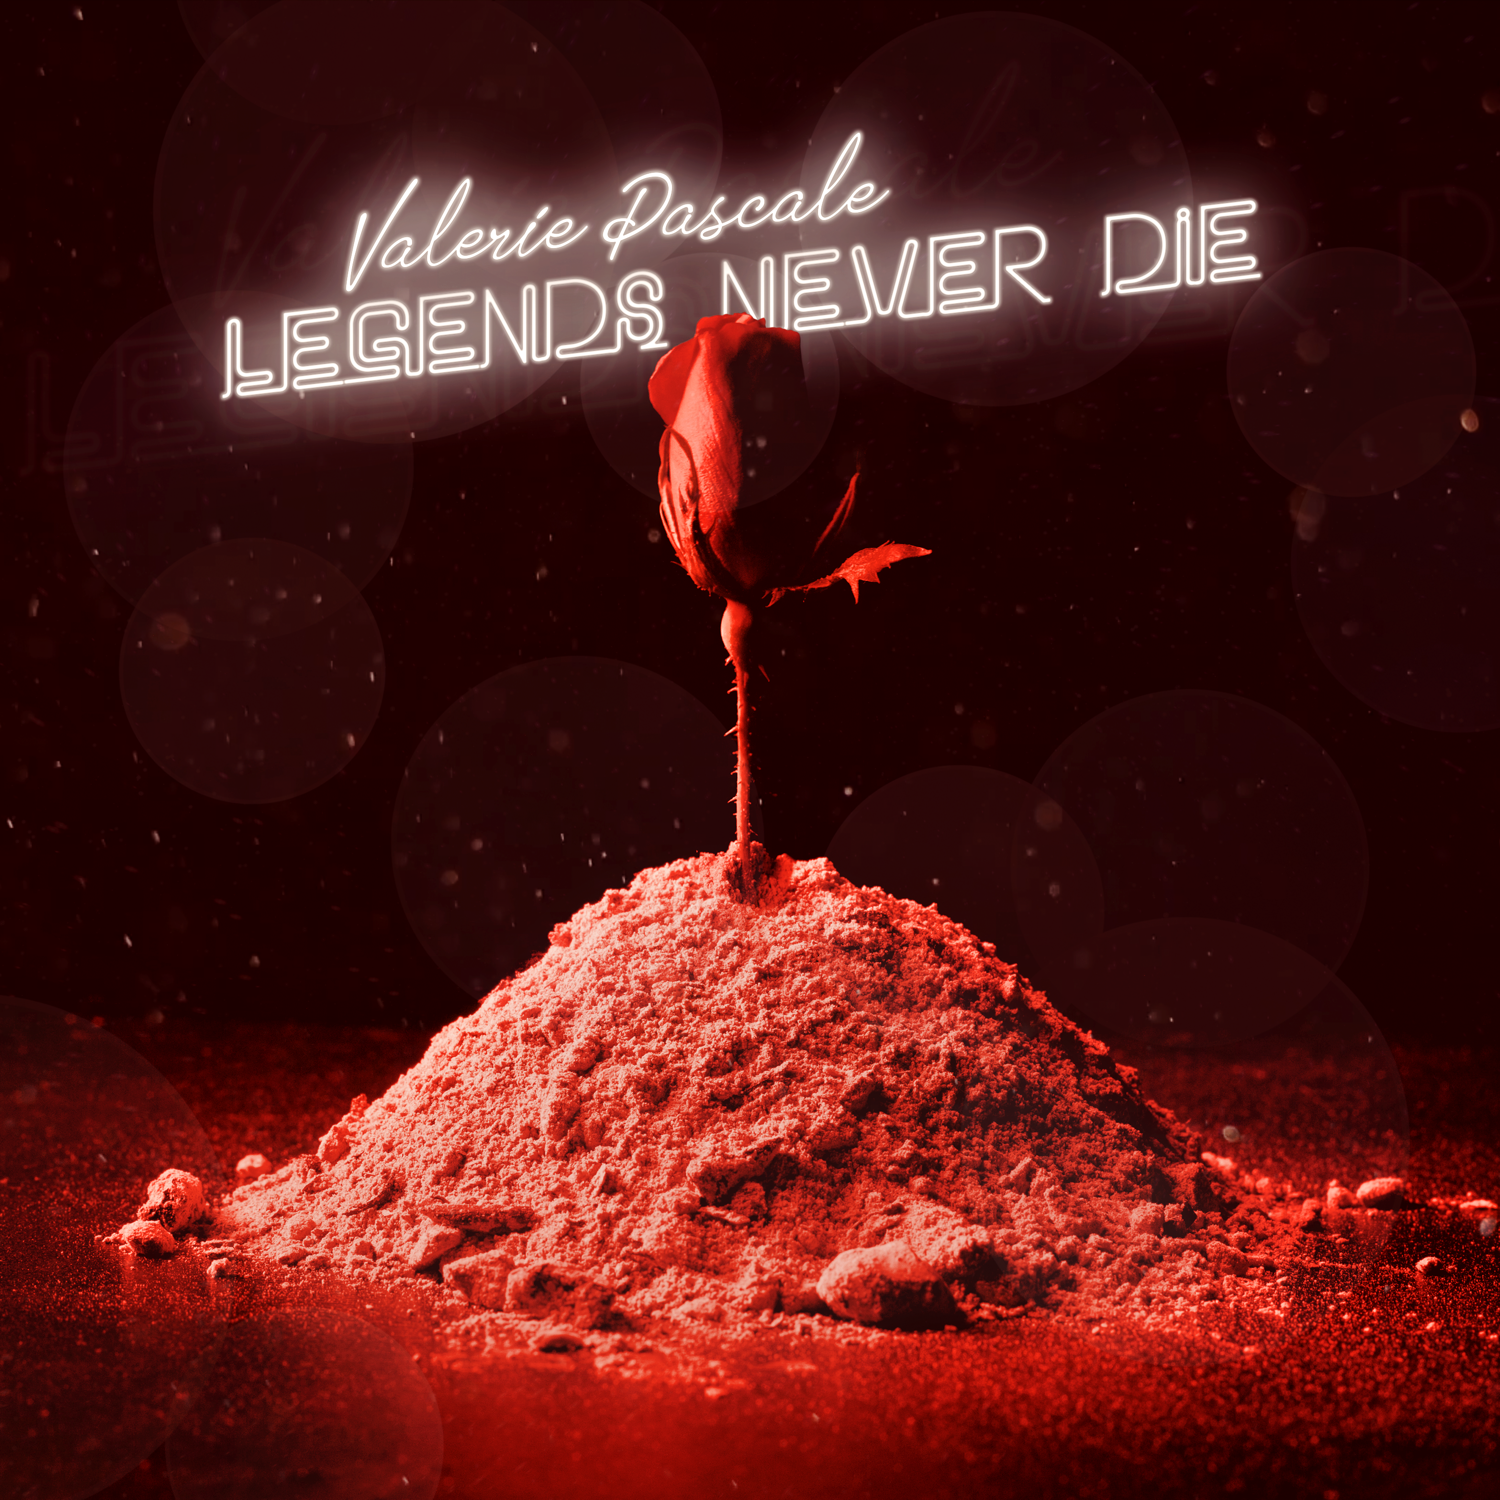 [Video] Valerie Pascale – Legends Never Die (Official Music Video)